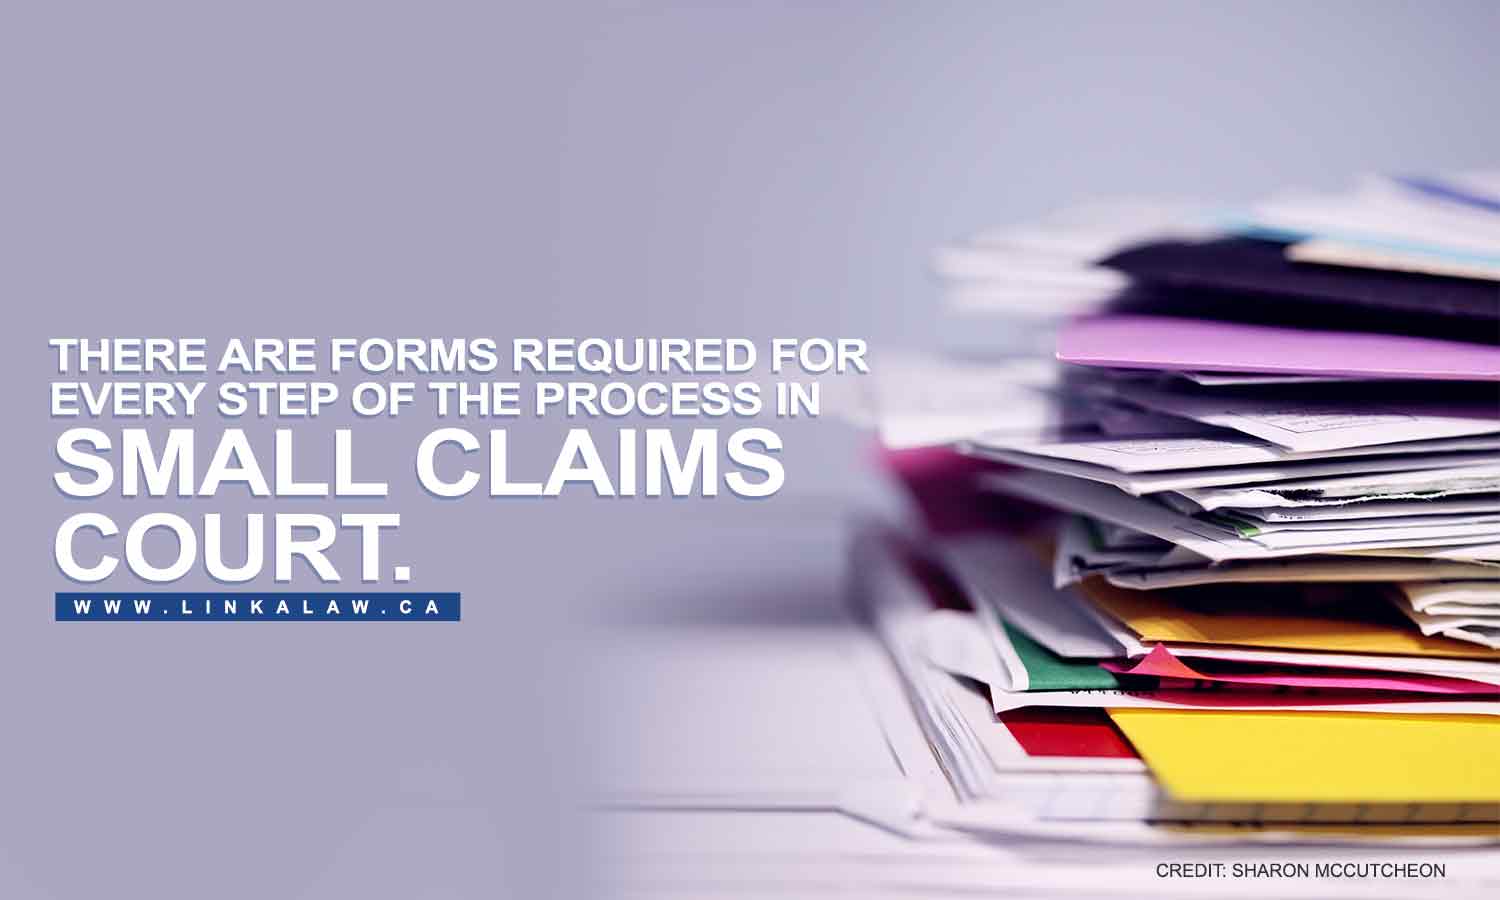 There are forms required for every step of the process in small claims court.